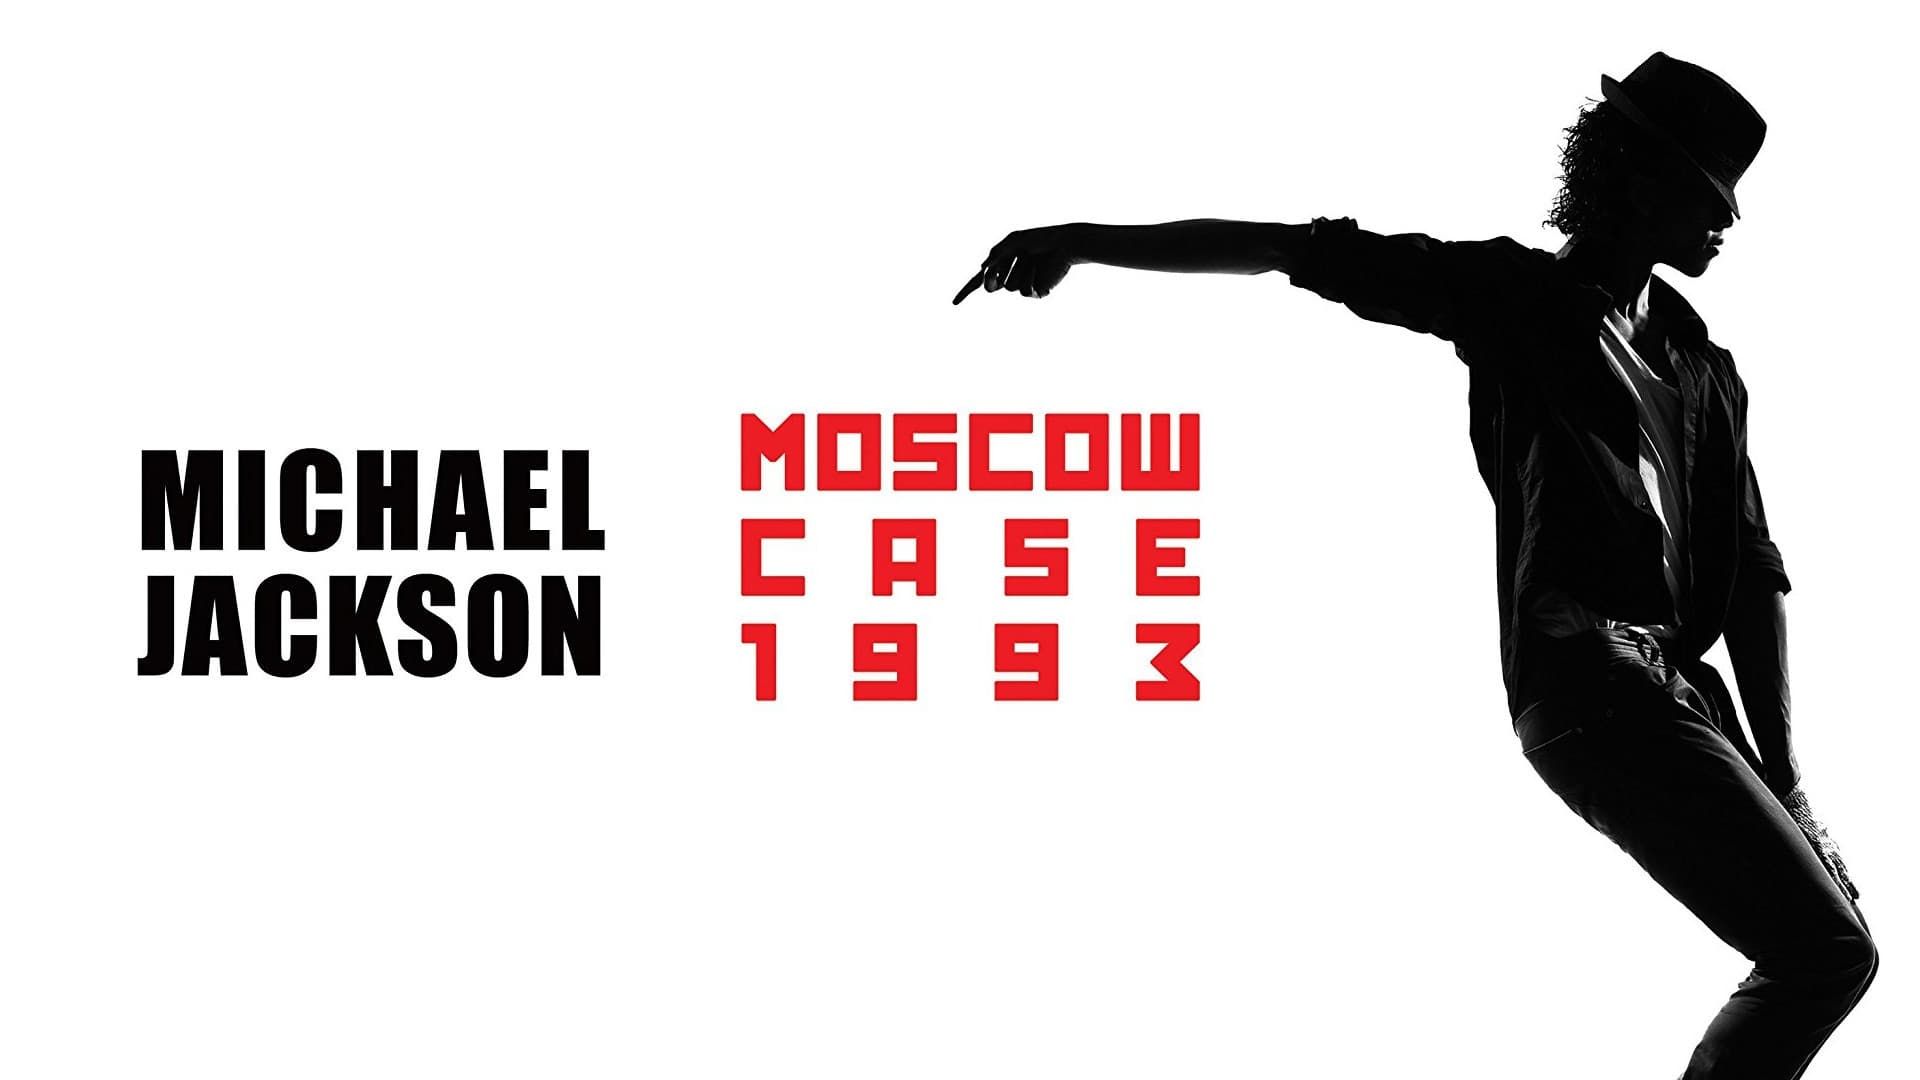 Michael Jackson: Moscow Case 1993 background